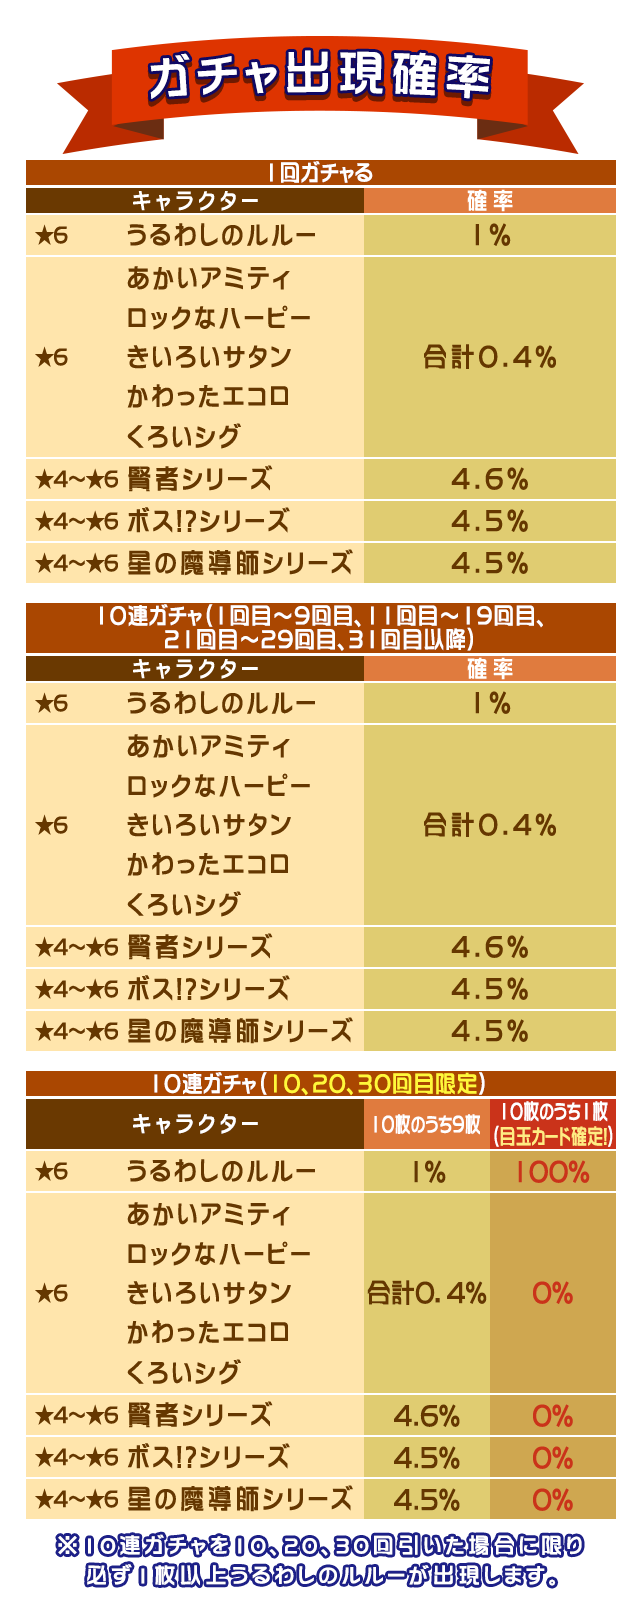 gacha_pfesDX_webview_table_160928.png